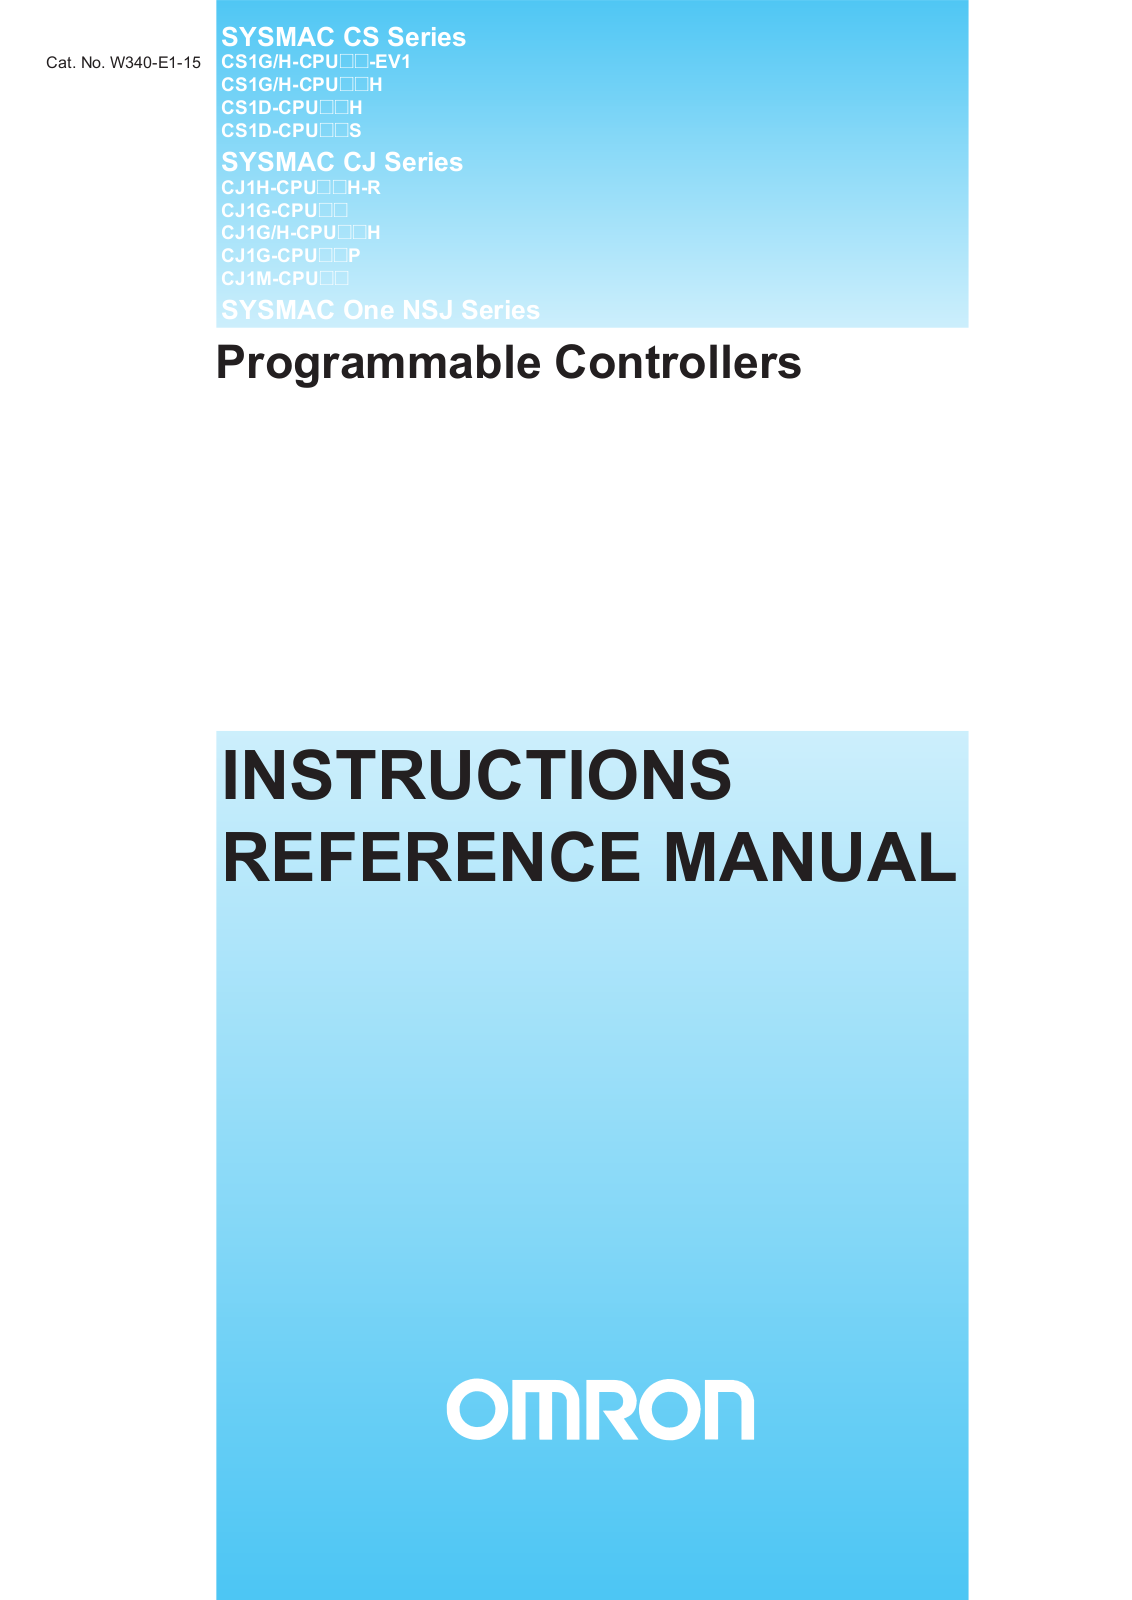 Omron SYSMAC ONE NSJ, SYSMAC CJ, SYSMAC CS REFERENCE MANUAL